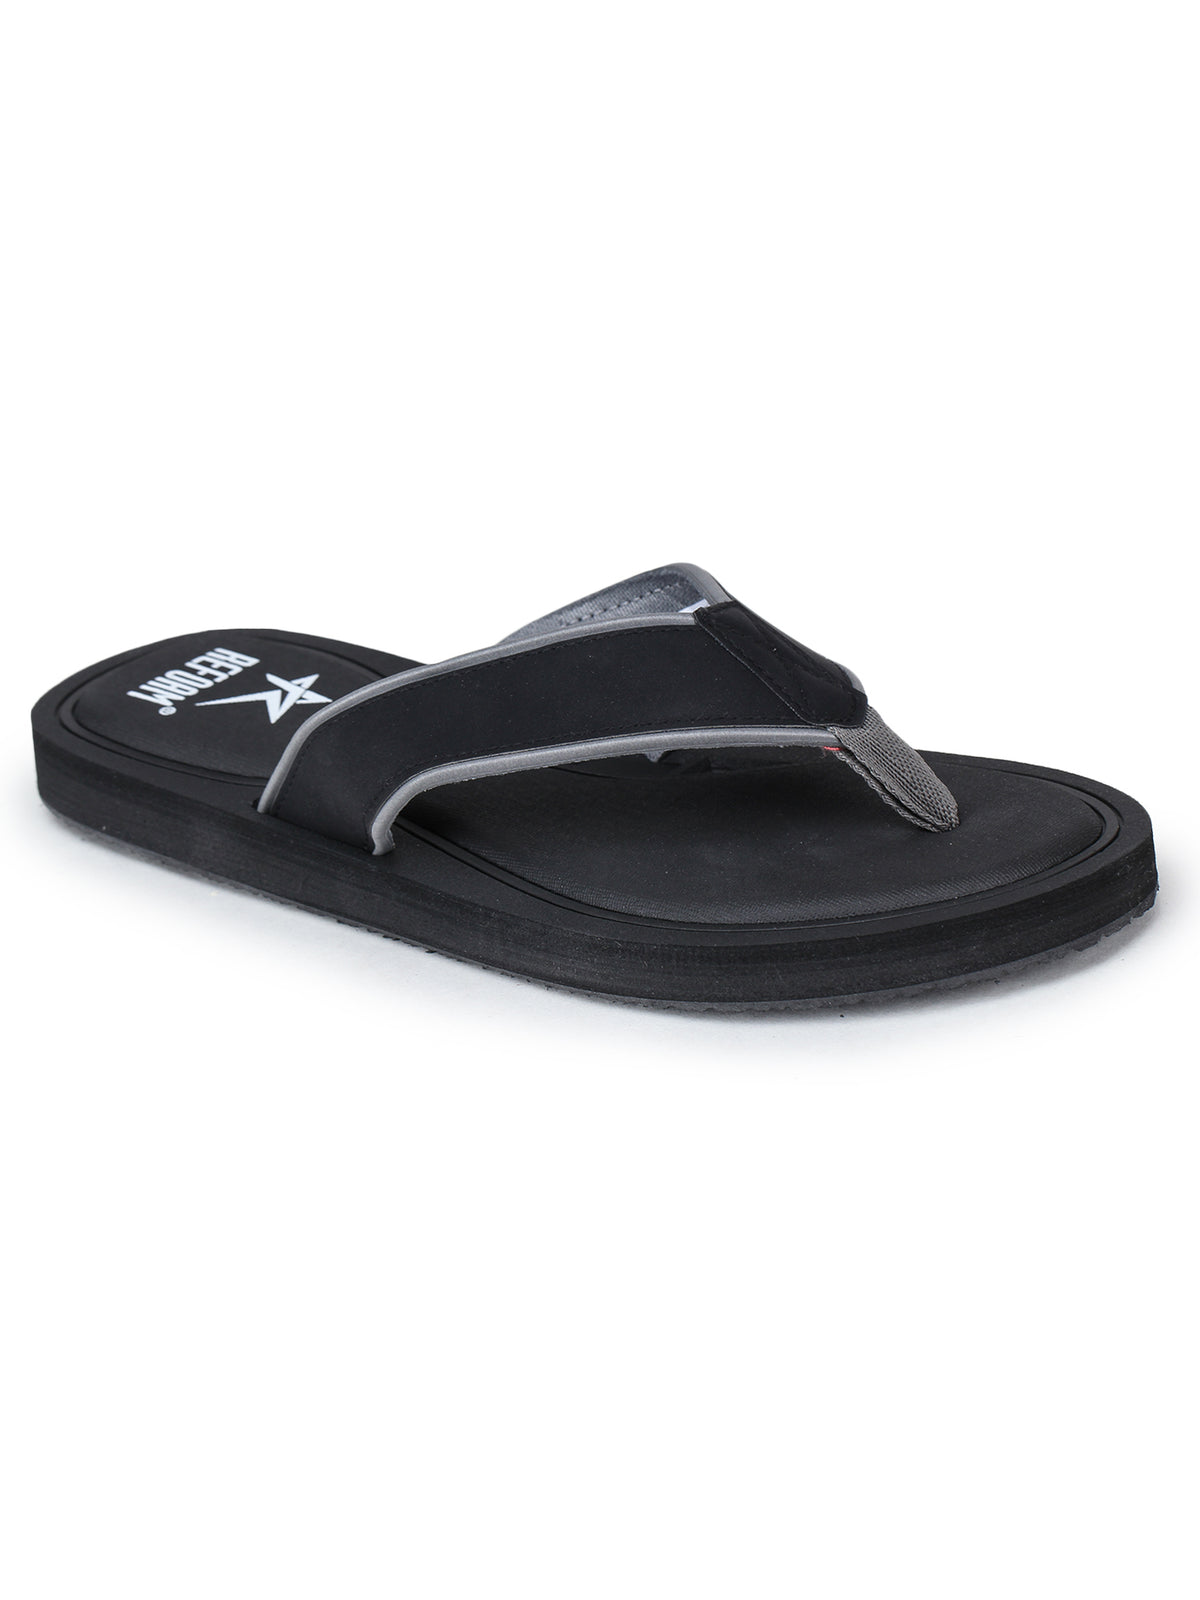 Black Solid Rubber Slip On Casual Slippers For Men